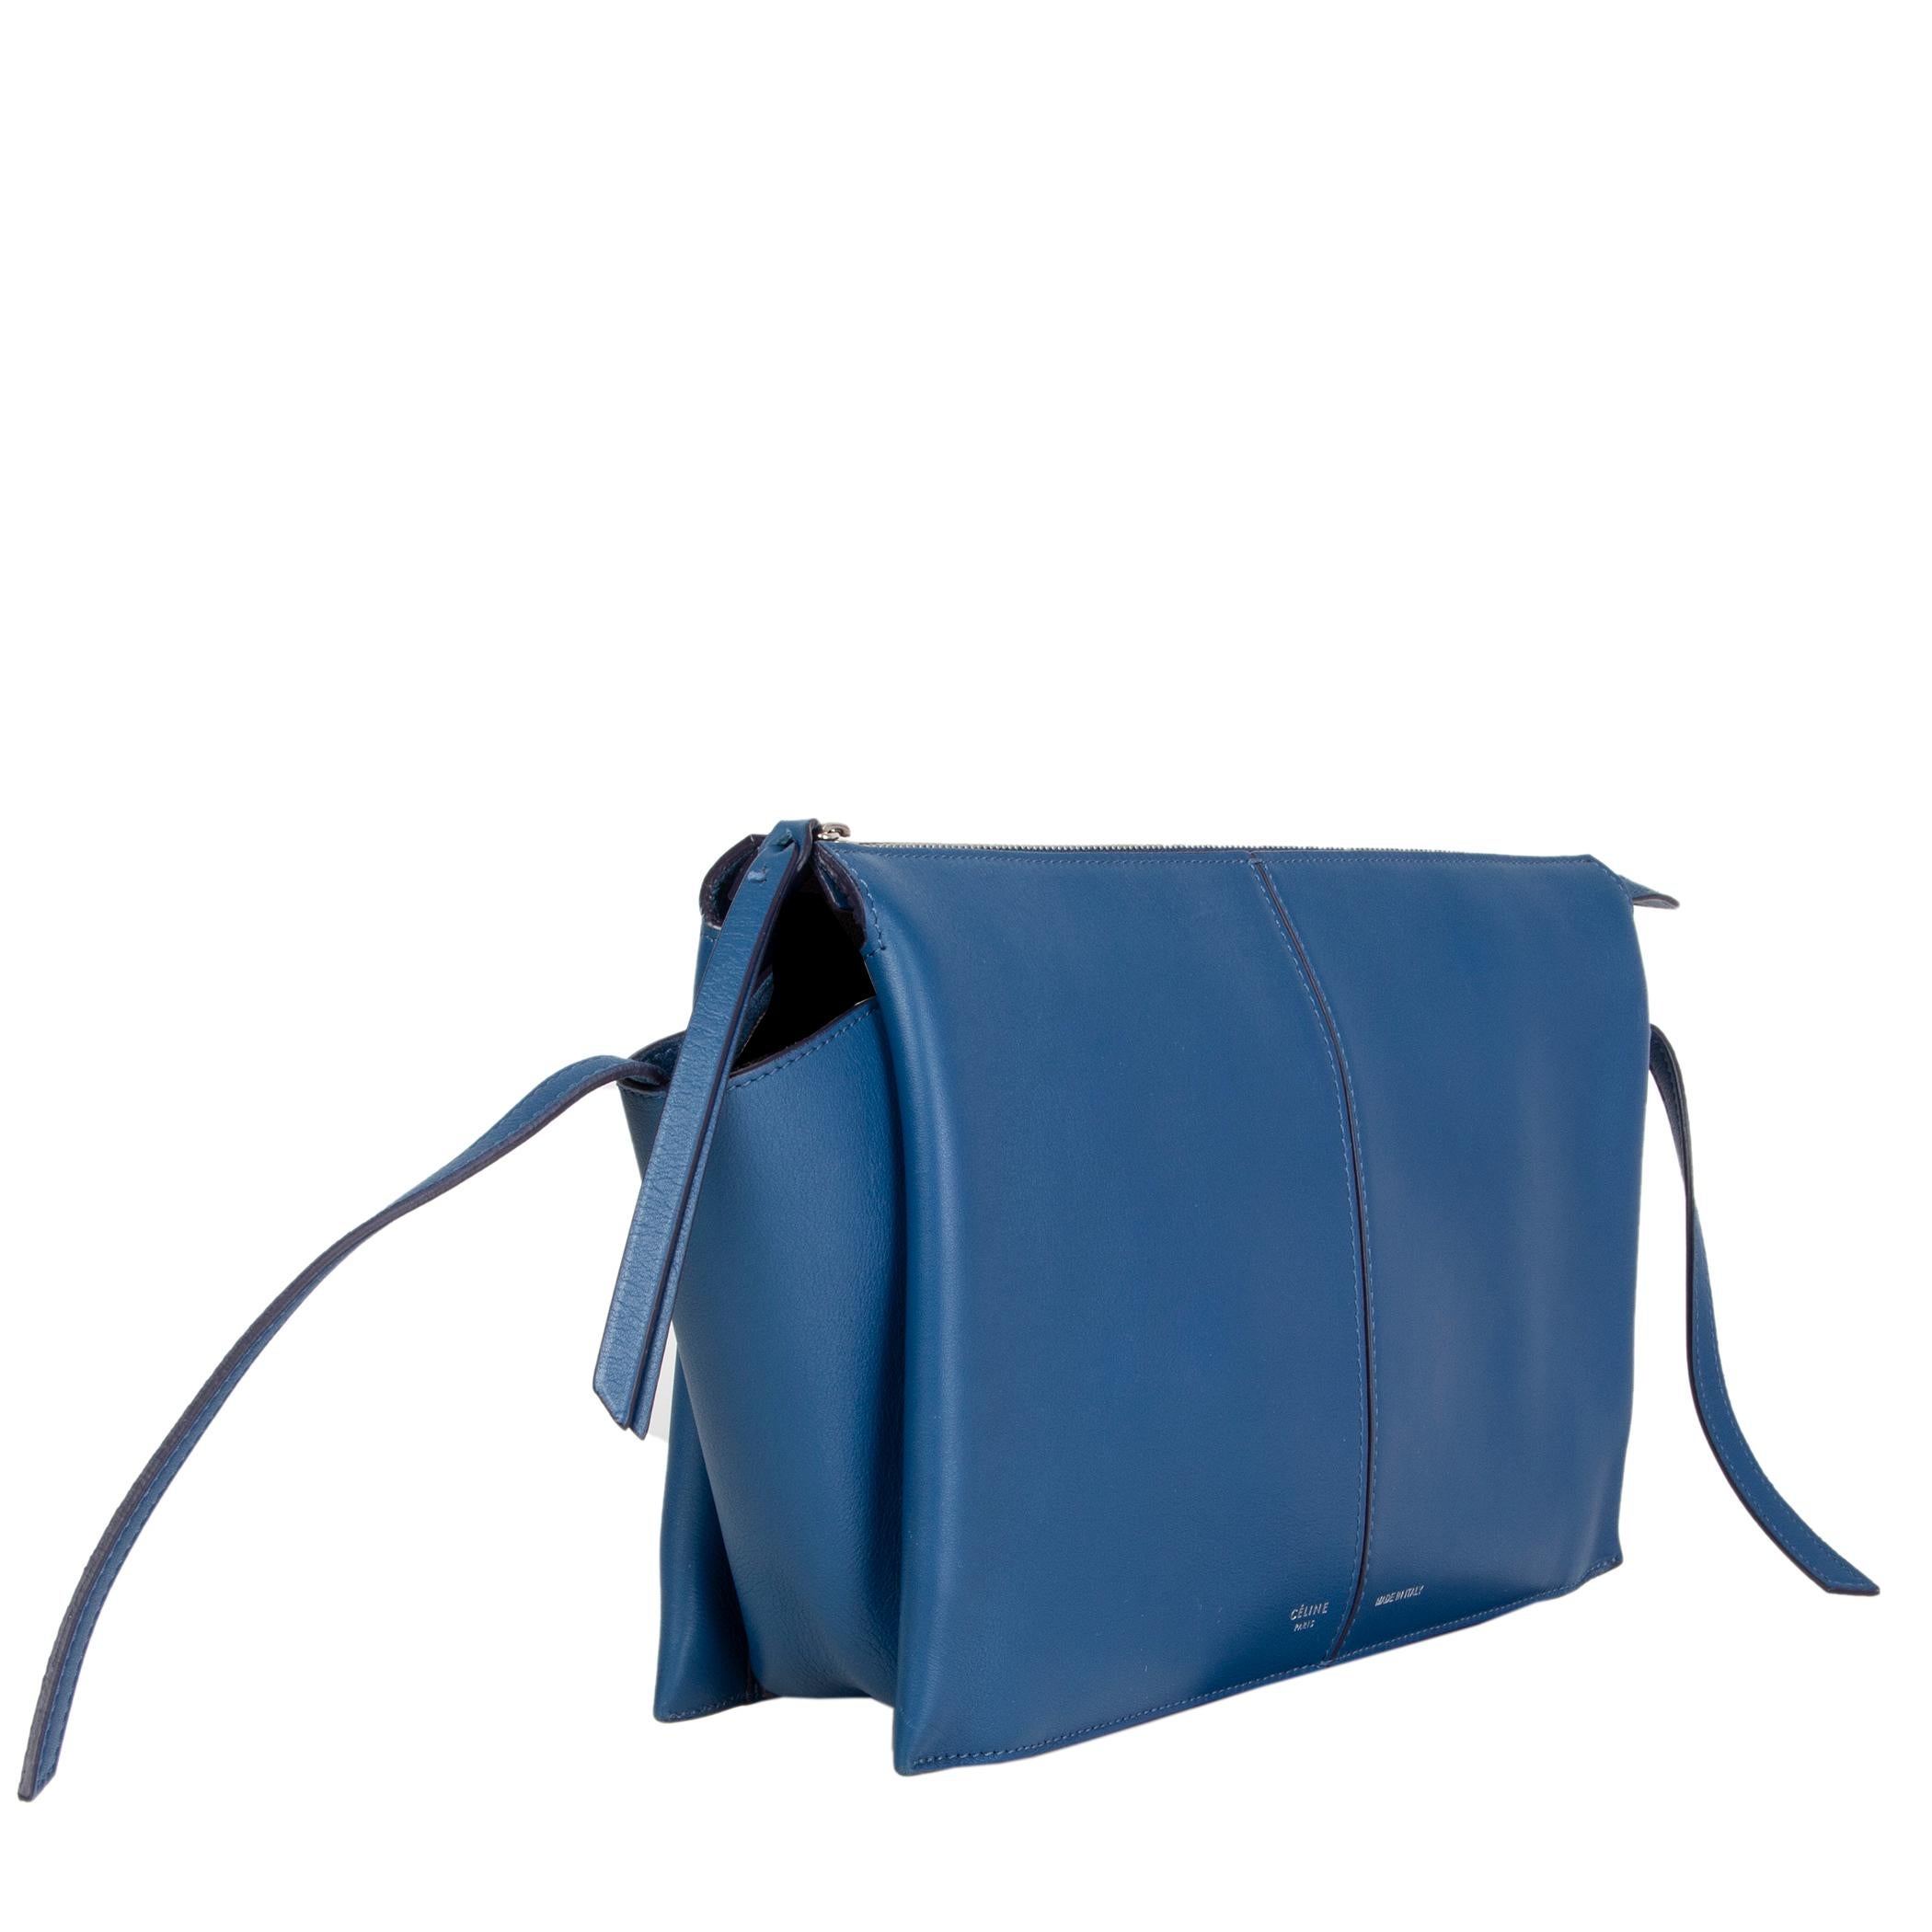 Céline ' Tri-Fold' clutch in aqua blue smooth and supple calfskin with winged sides. Opens with a zipper on and is divided in three compartments with two slip pockets and a zipper pocket. Unlined. Has been carried and is in excellent condition.